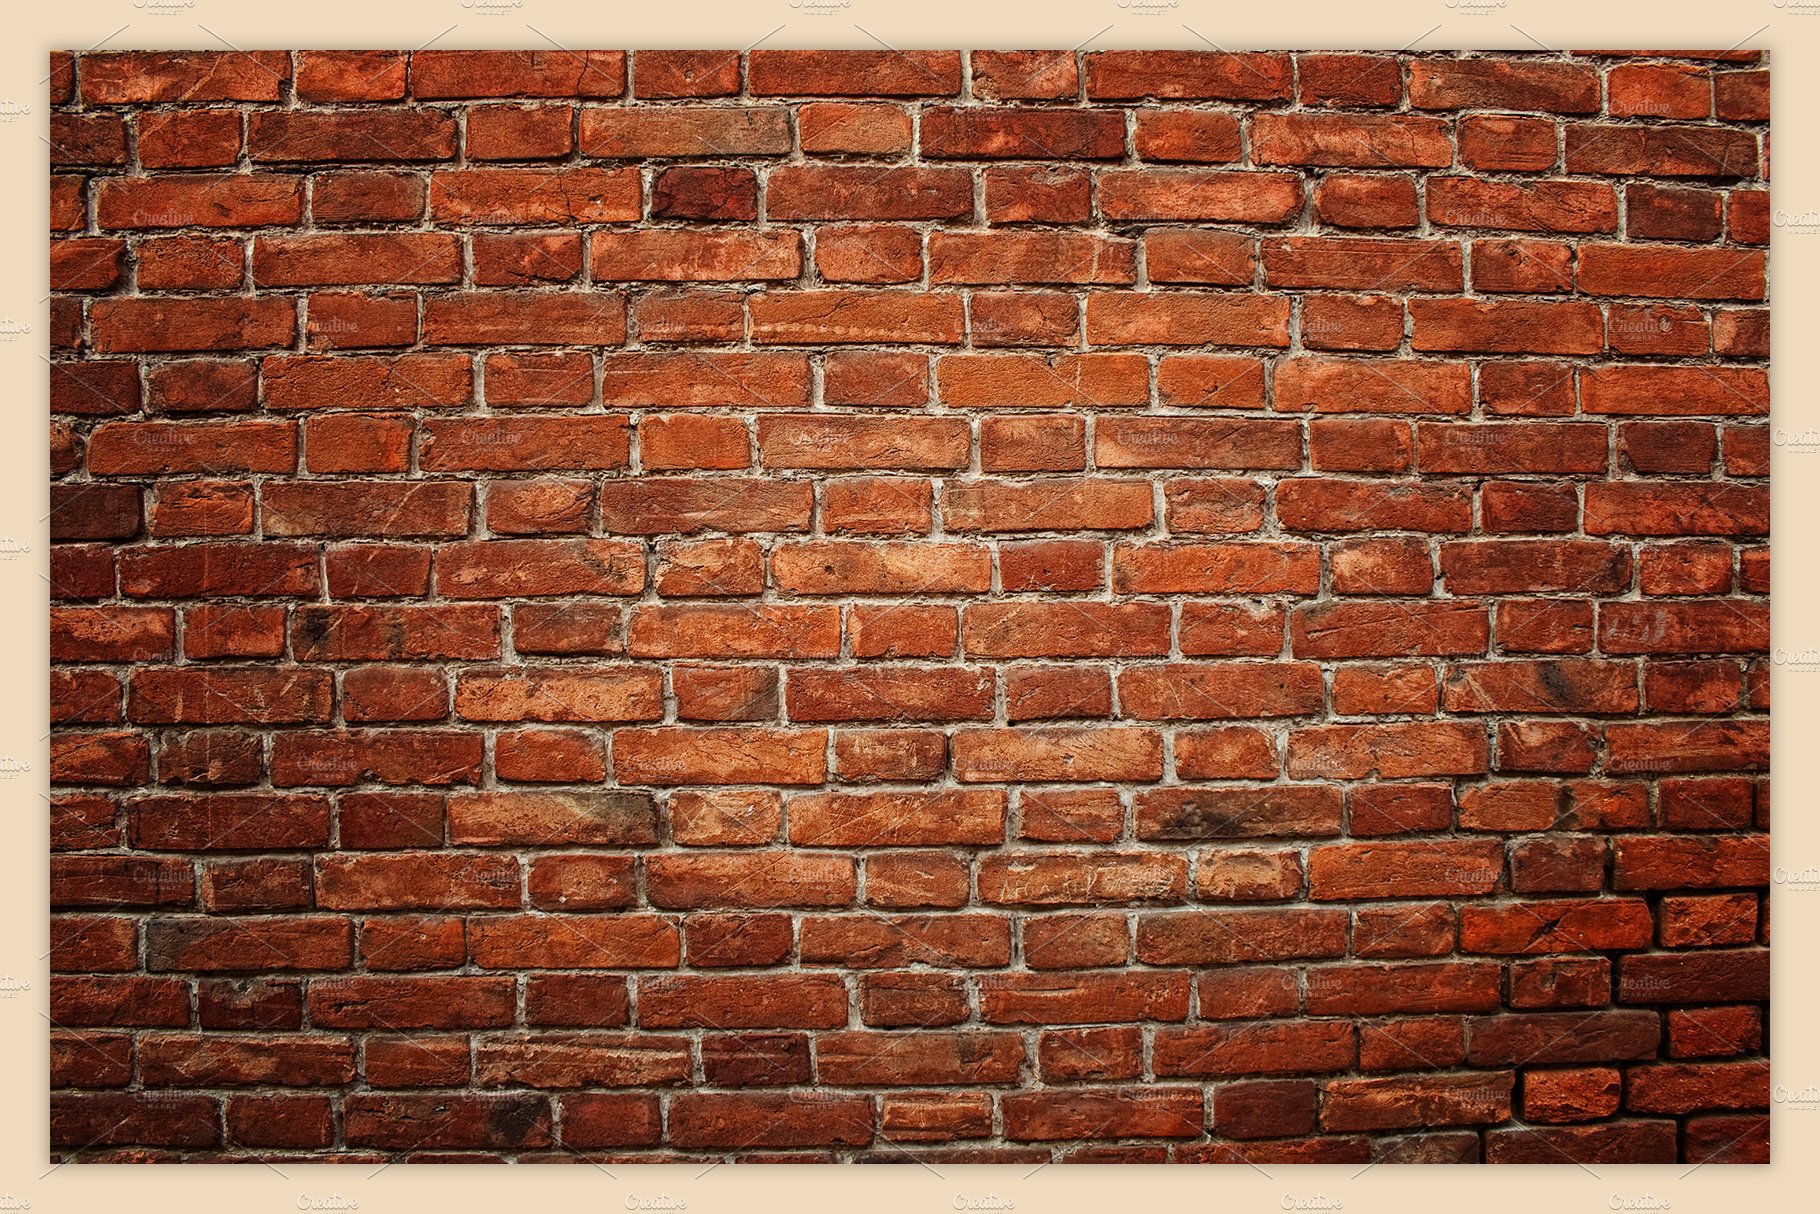 Brick wall textures backgrounds preview image.